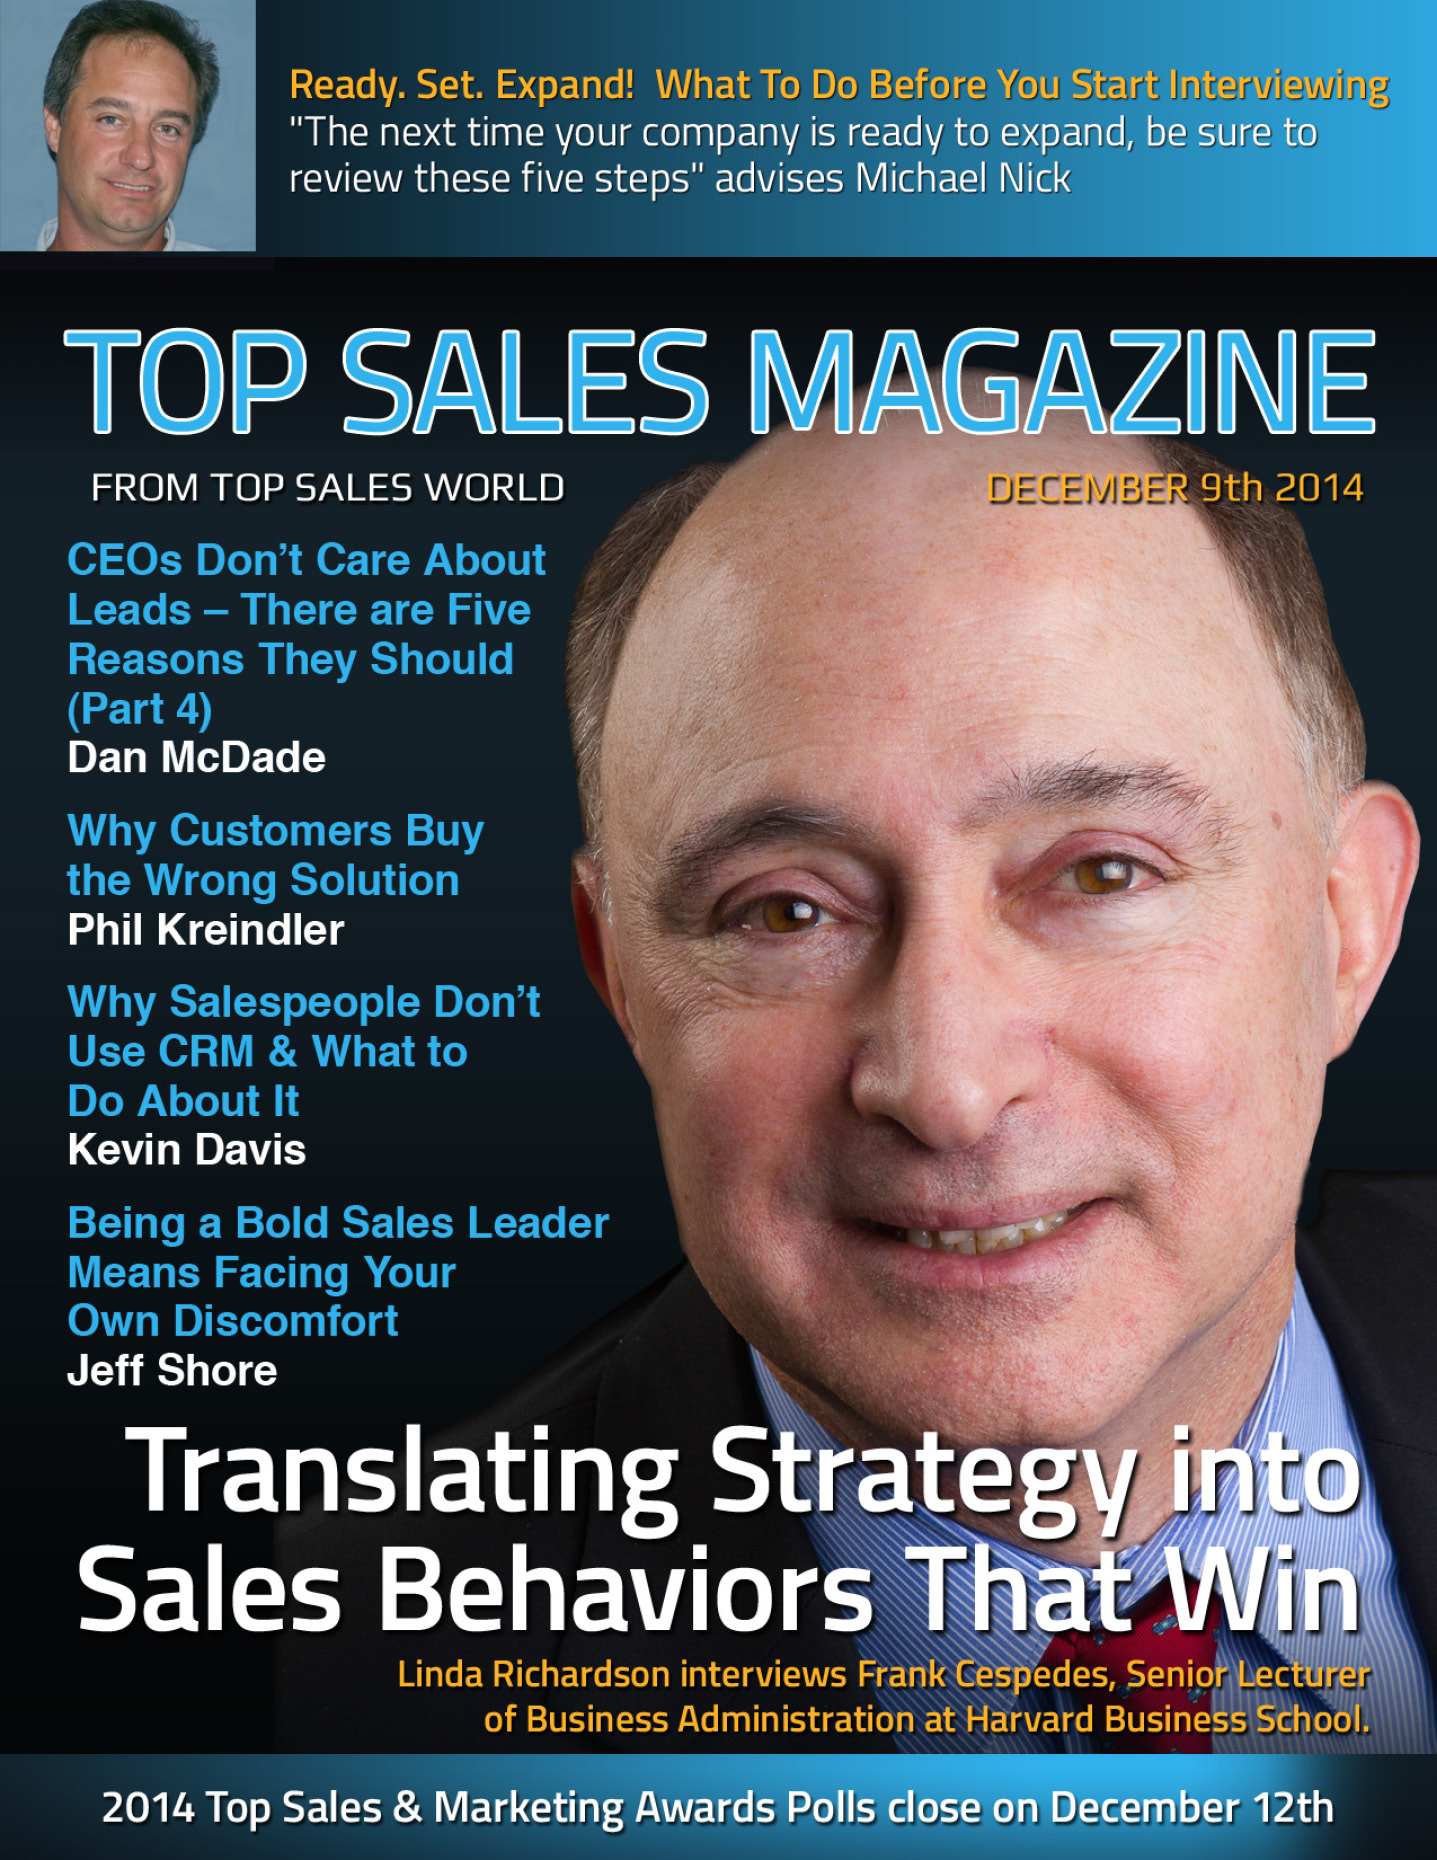 Translating Strategy Into Sales Behaviors That Win